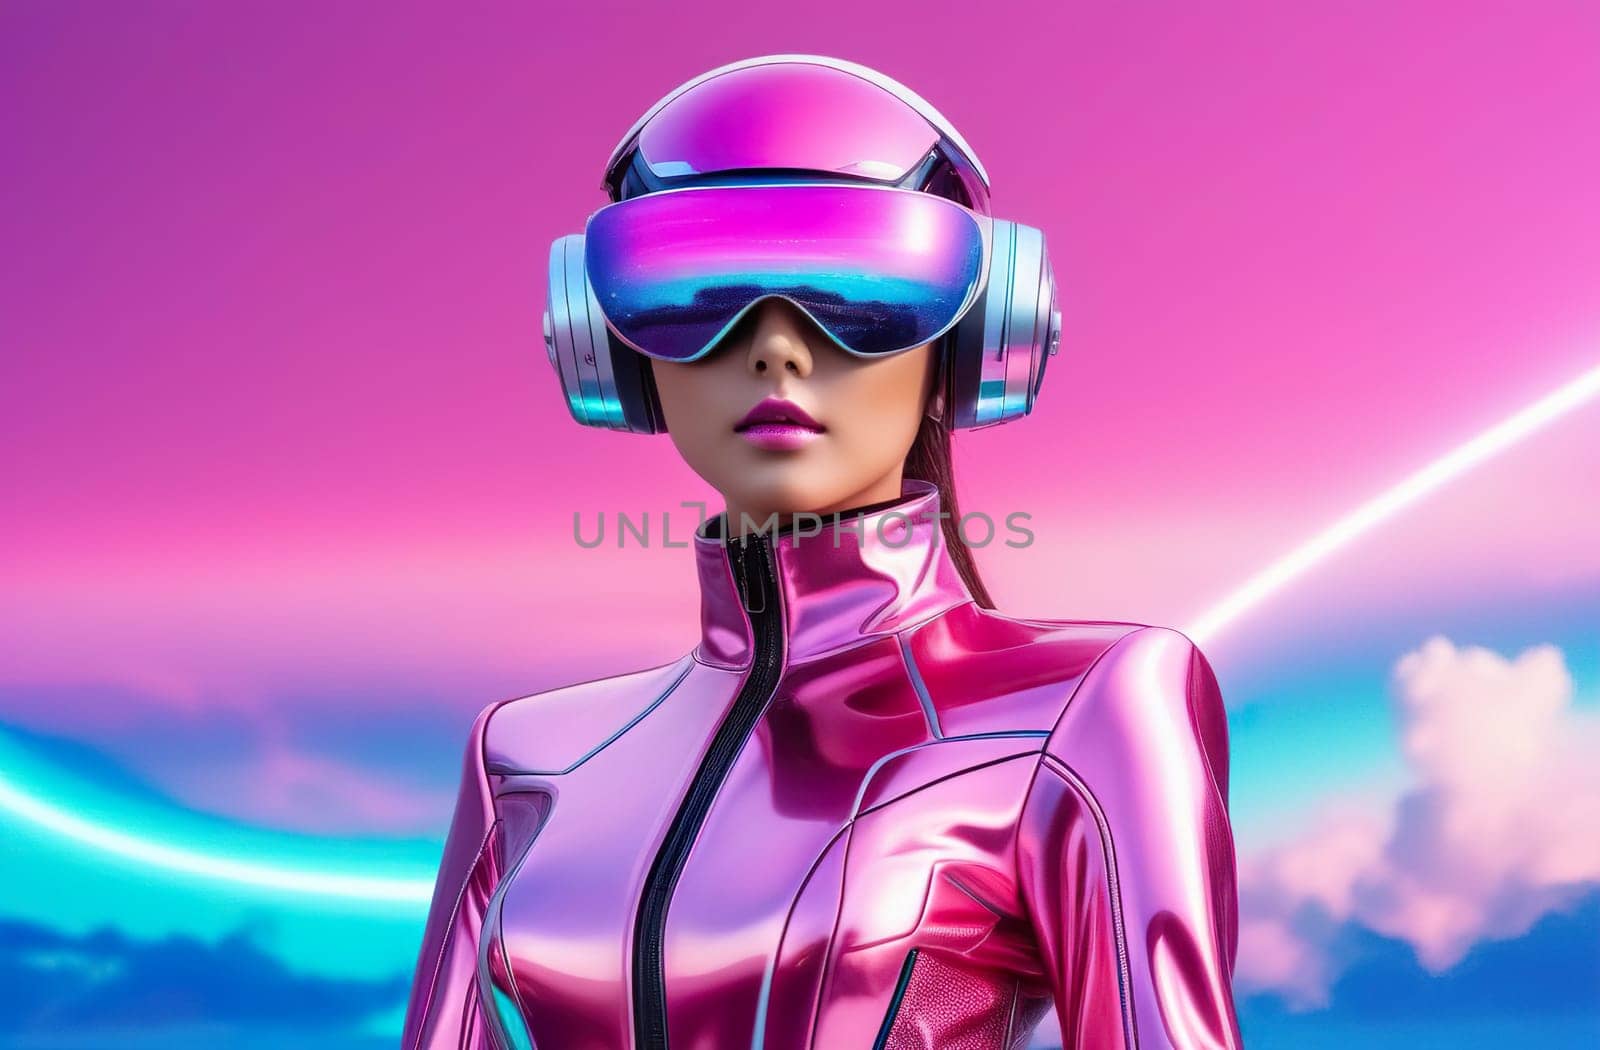 Concept of the future. Portrait of a girl in neon light wearing neon glasses on a futuristic neon pink and lilac background. Bright style, beauty concept. by Proxima13